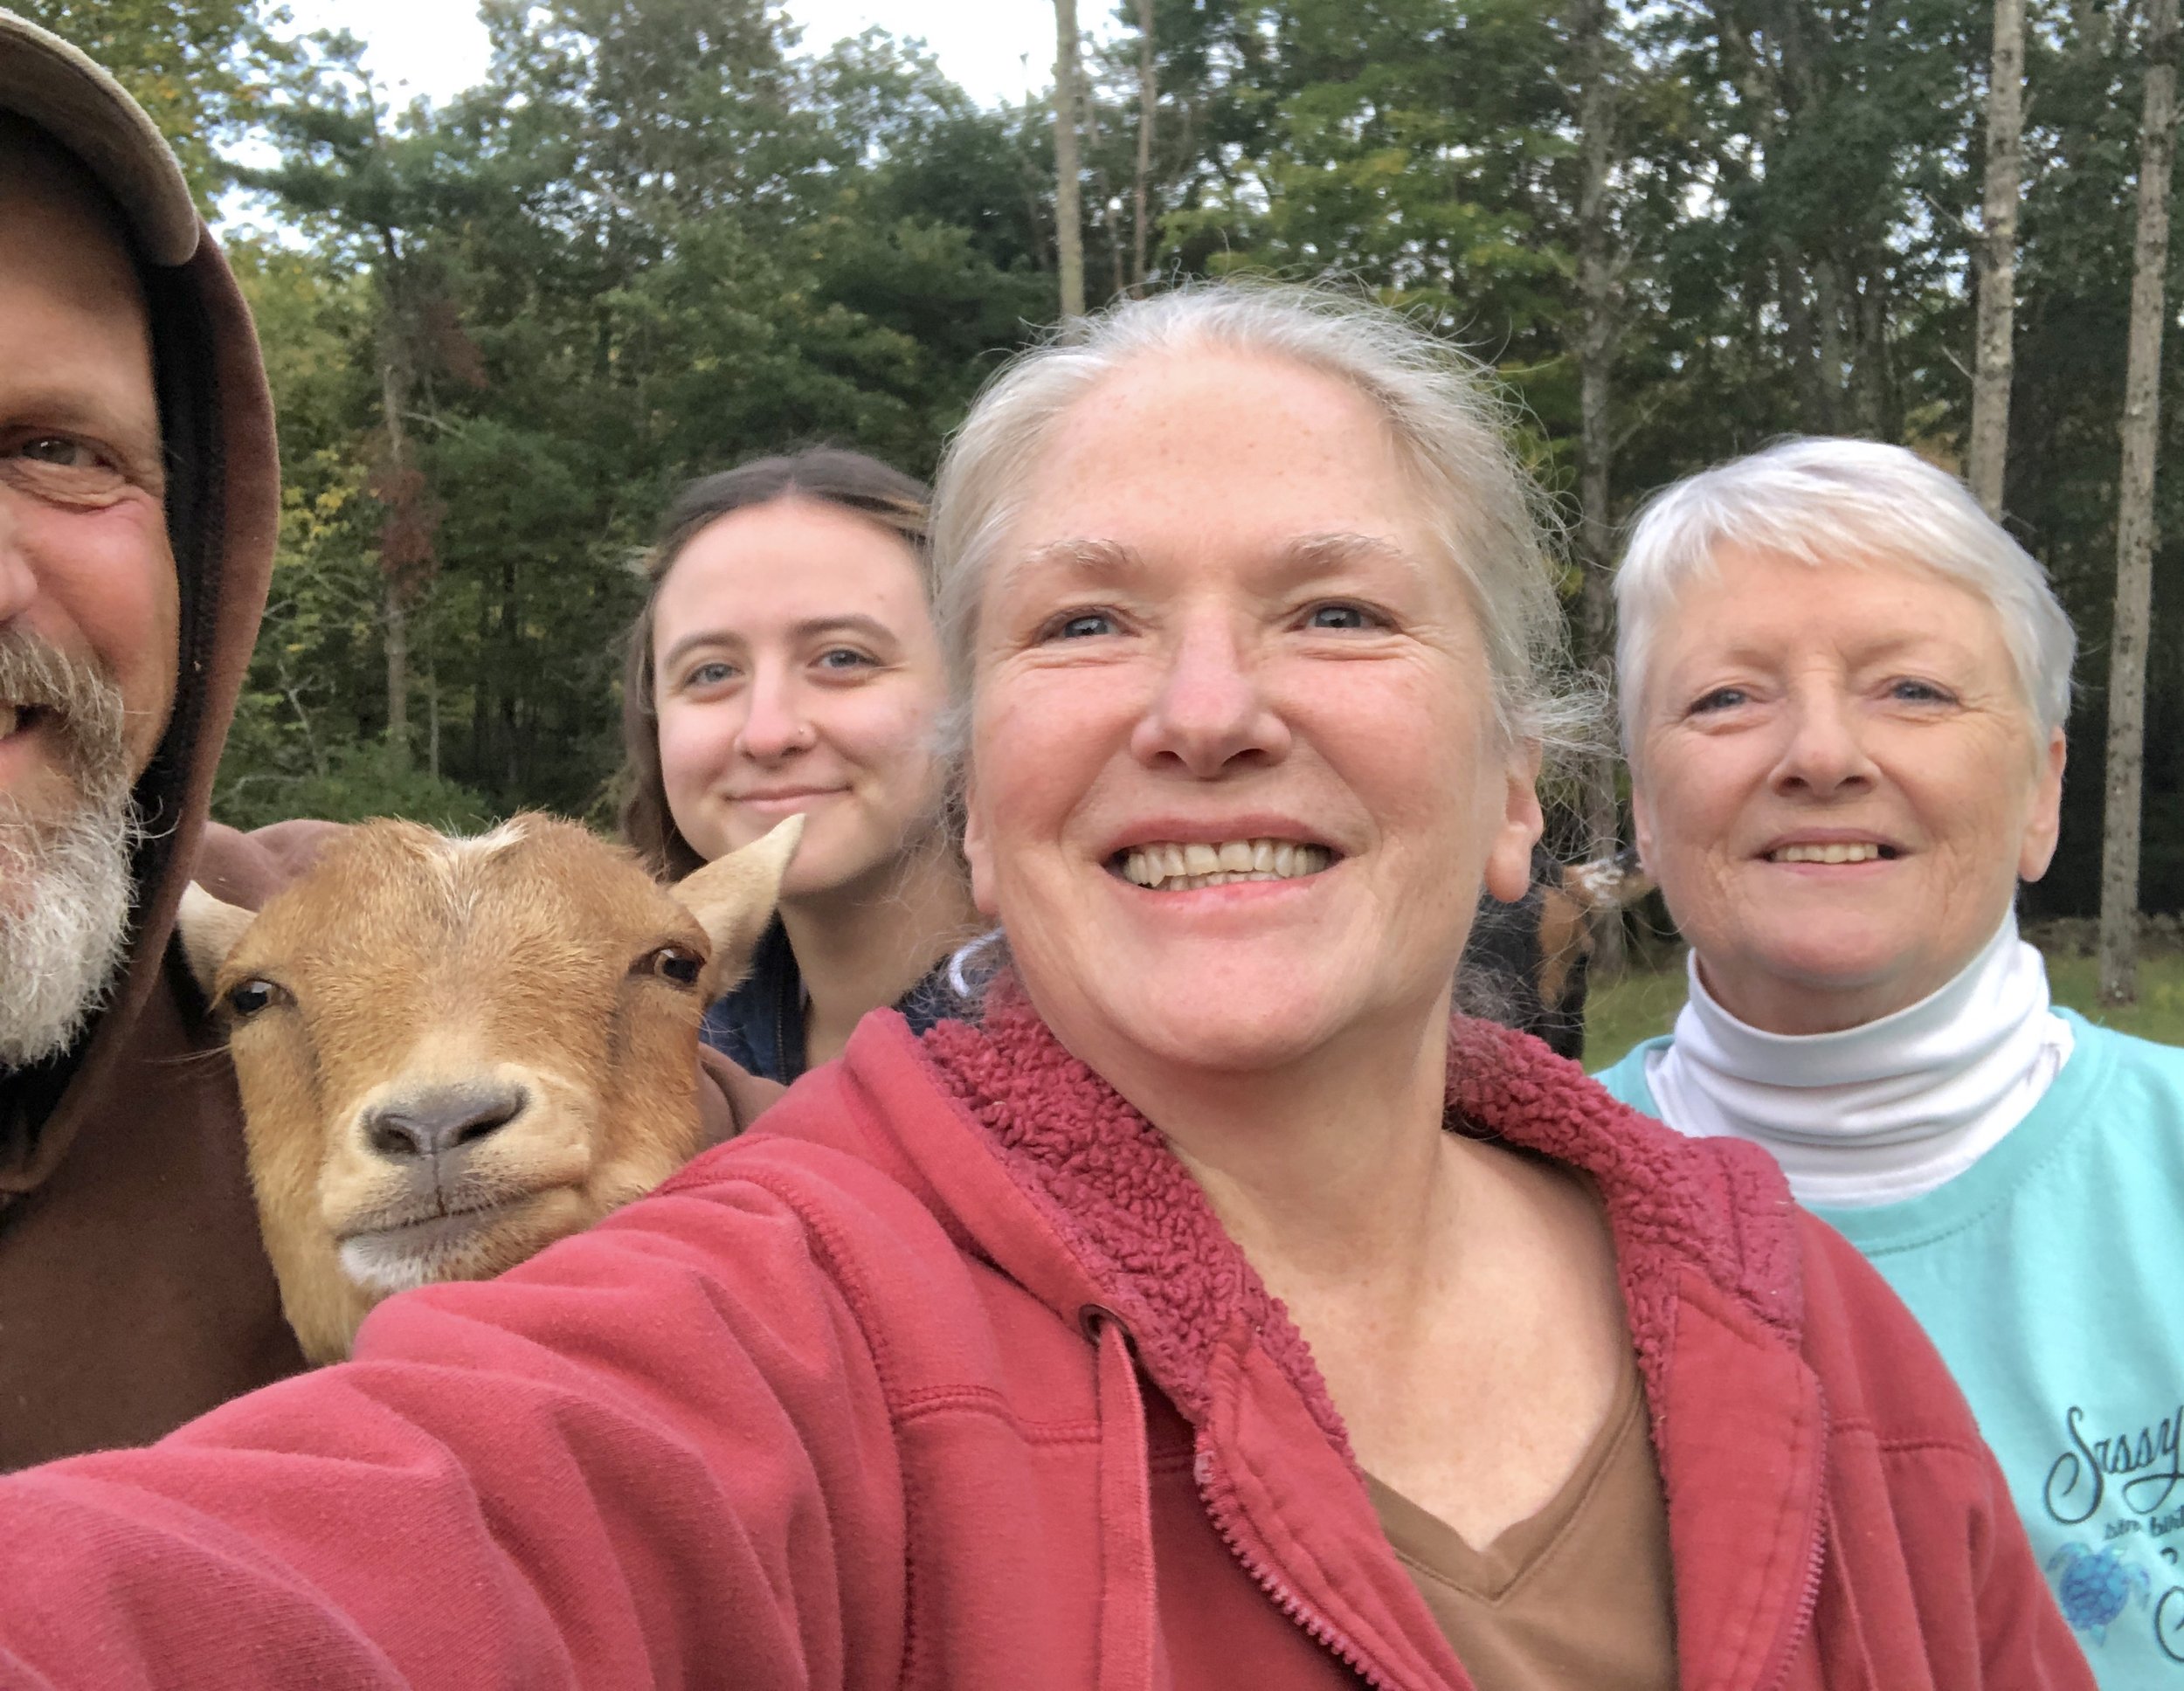 Blondi getting into the selfie during visit from Cindy and her niece - October 2022